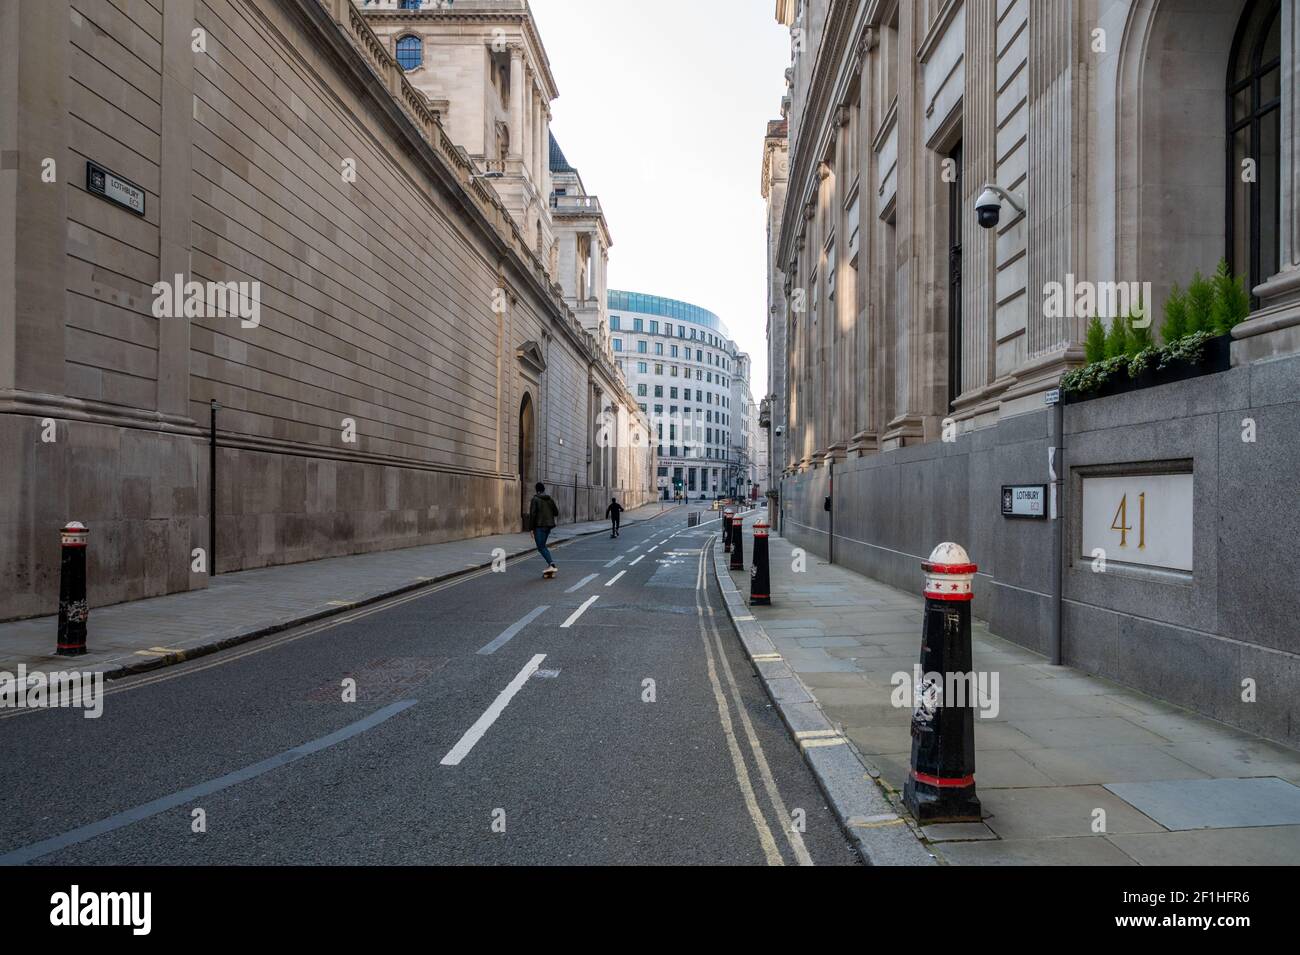 Covid pandemic lockdown; a deserted street in the City of London financial district with two skate borders. (Lothbury, Bank of England, London). Stock Photo